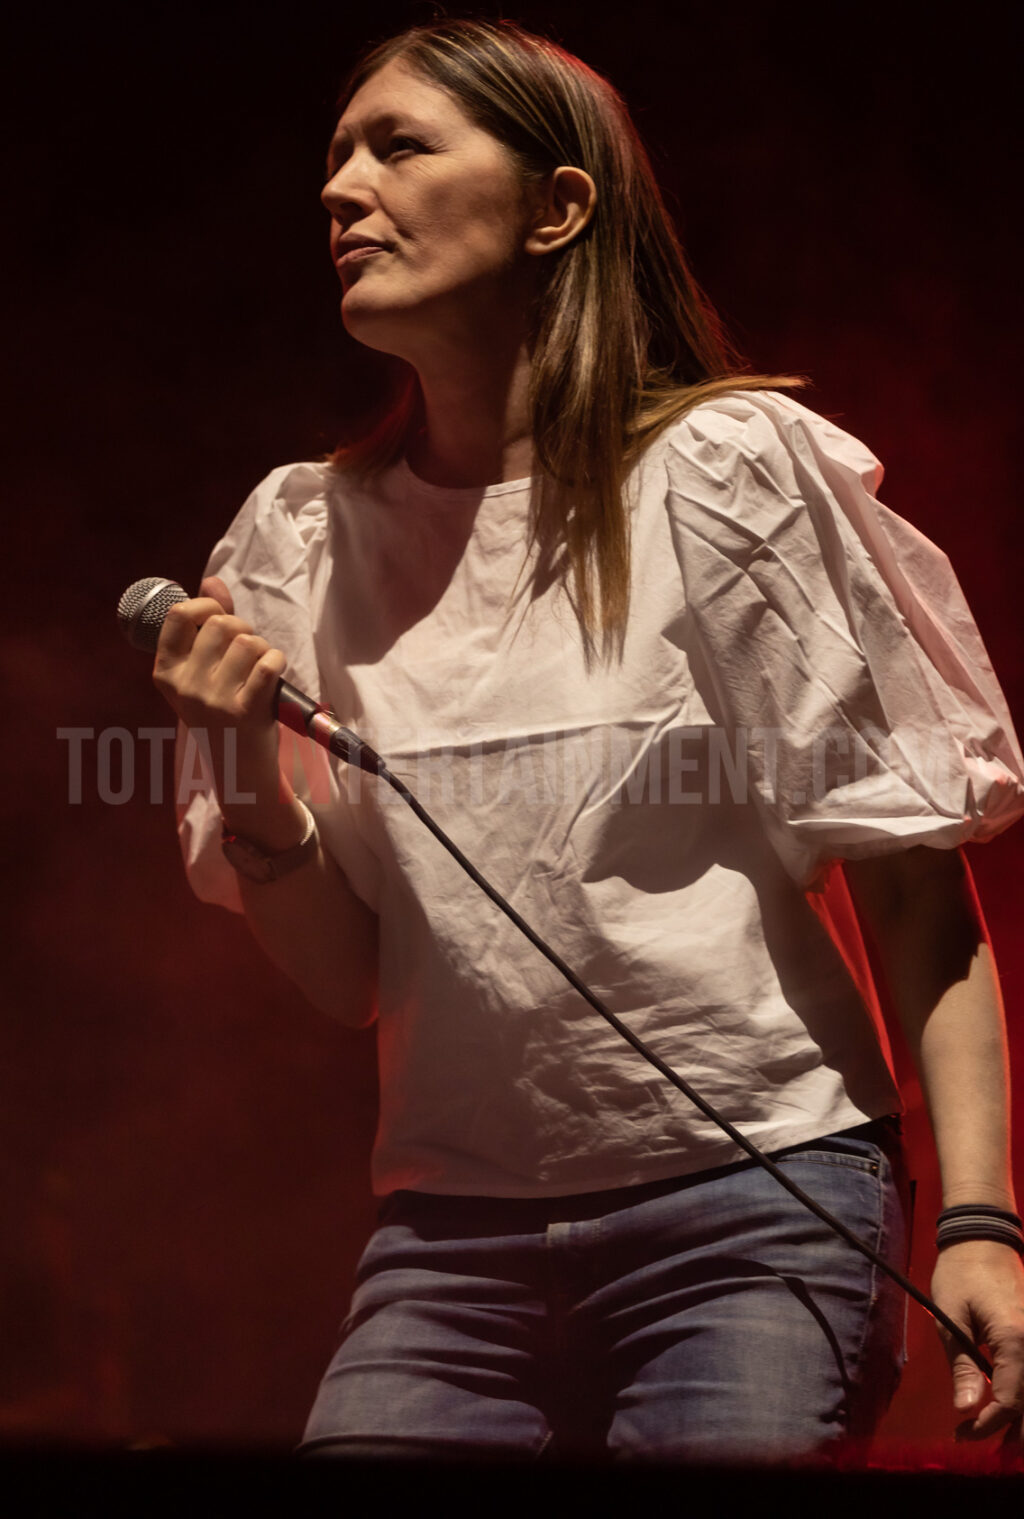 Paul Heaton, Jacqui Abbot, Music, Live Event, First Direct Arena, Jo Forrest, TotalNtertainment